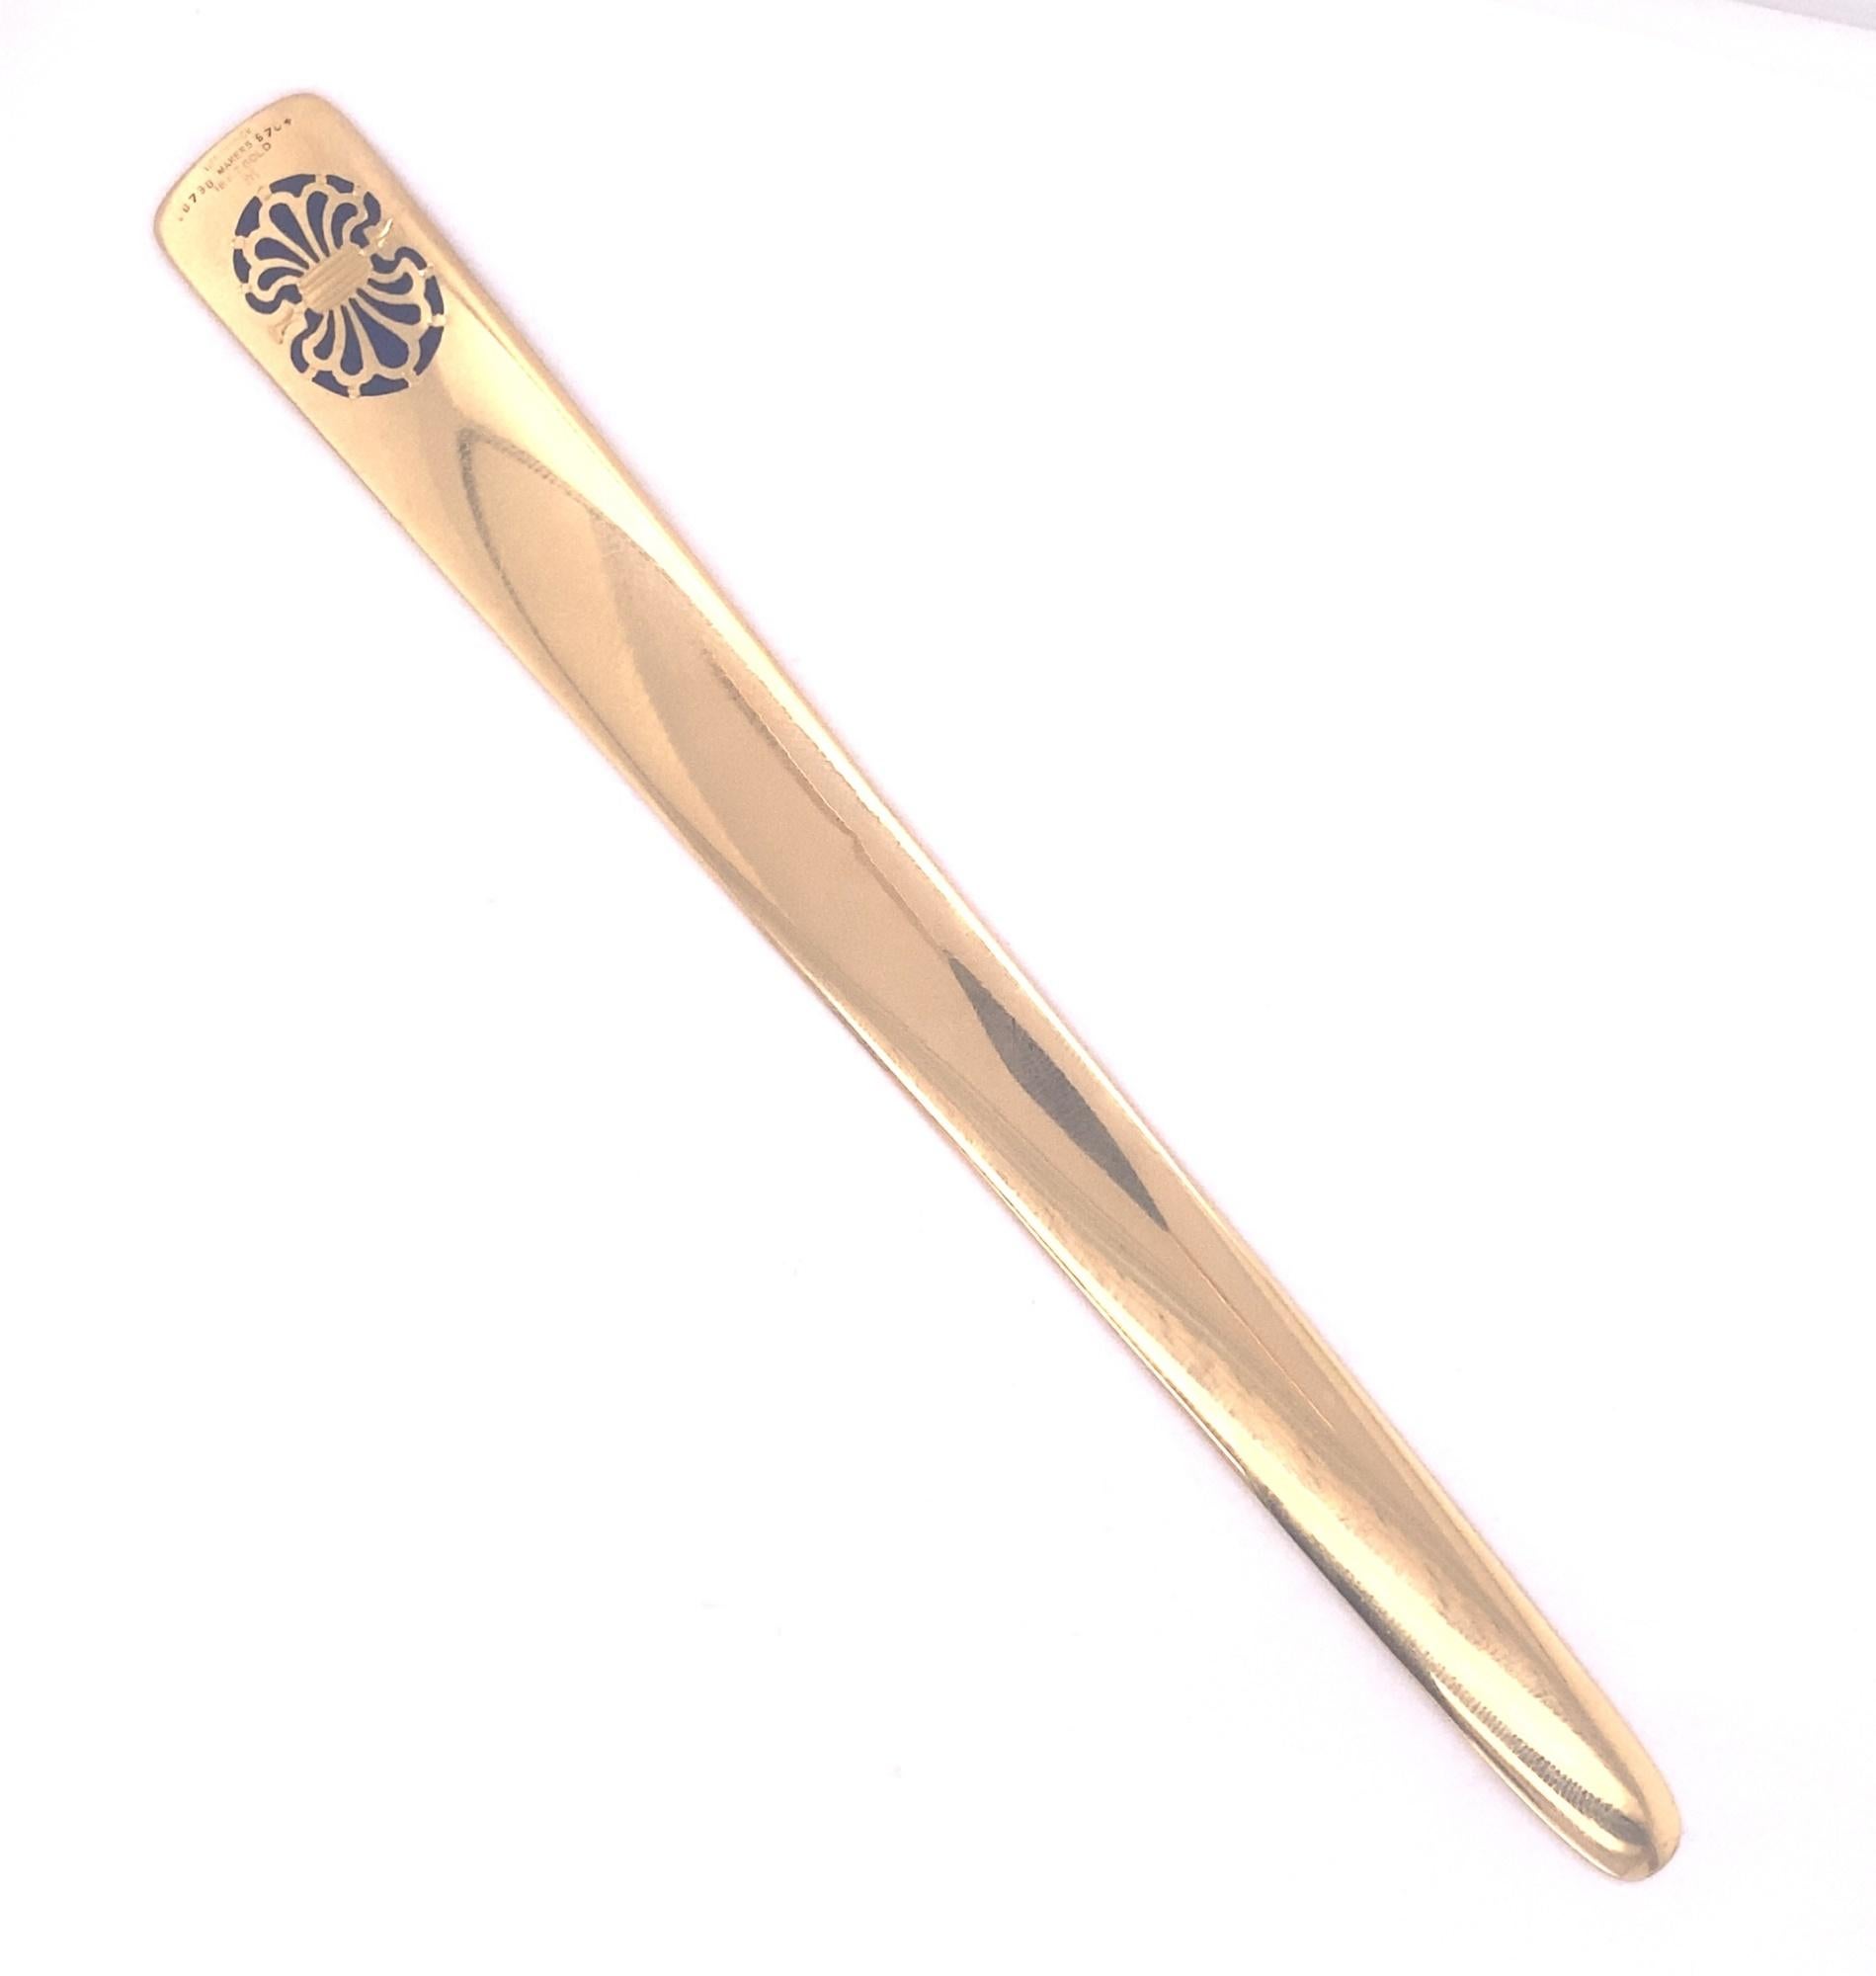 This is a stunning Antique 18K solid yellow gold letter opener with blue plique a jour design.  The top of the letter opener is marked Tiffany & Co #  18738 Makers 5704 18K Gold M, dating it c.1920.  The blue plique a jour art nouveau design is in